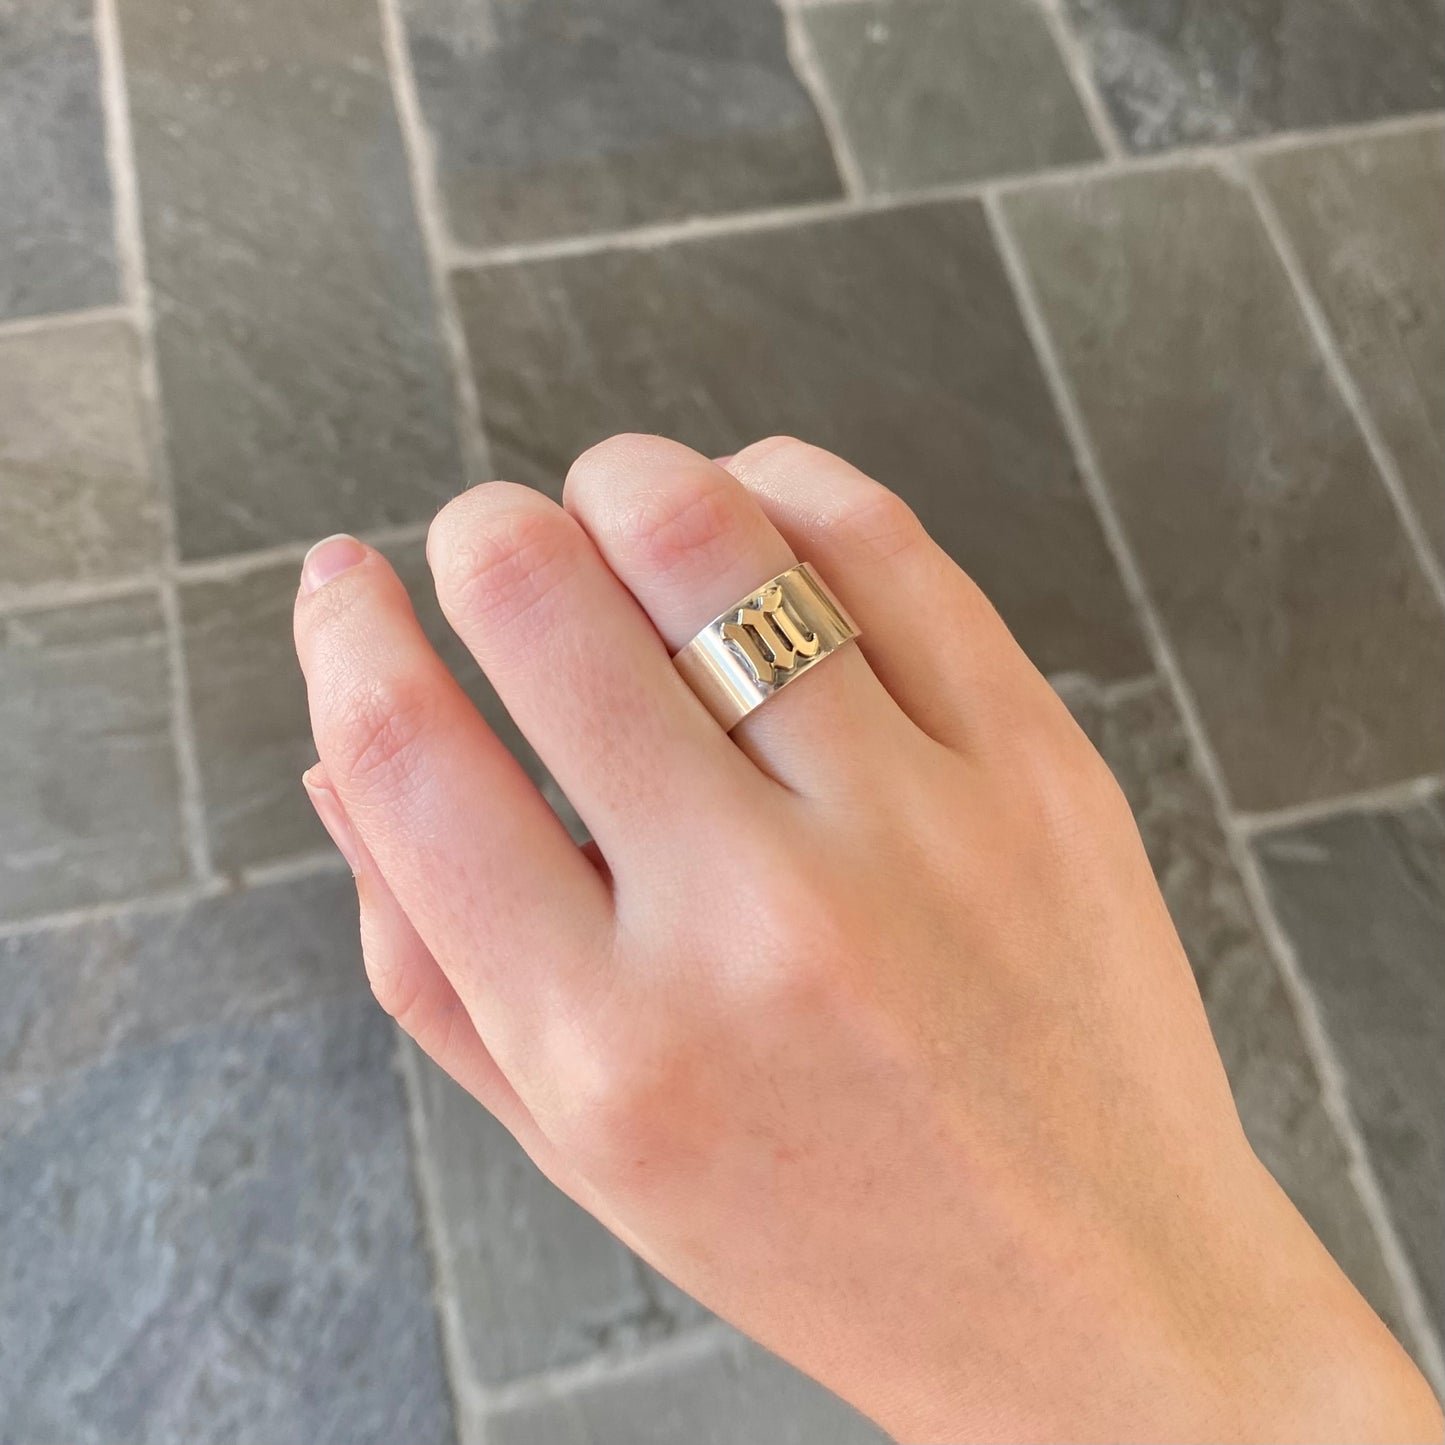 Silver Band with Gold Initial "M" Ring